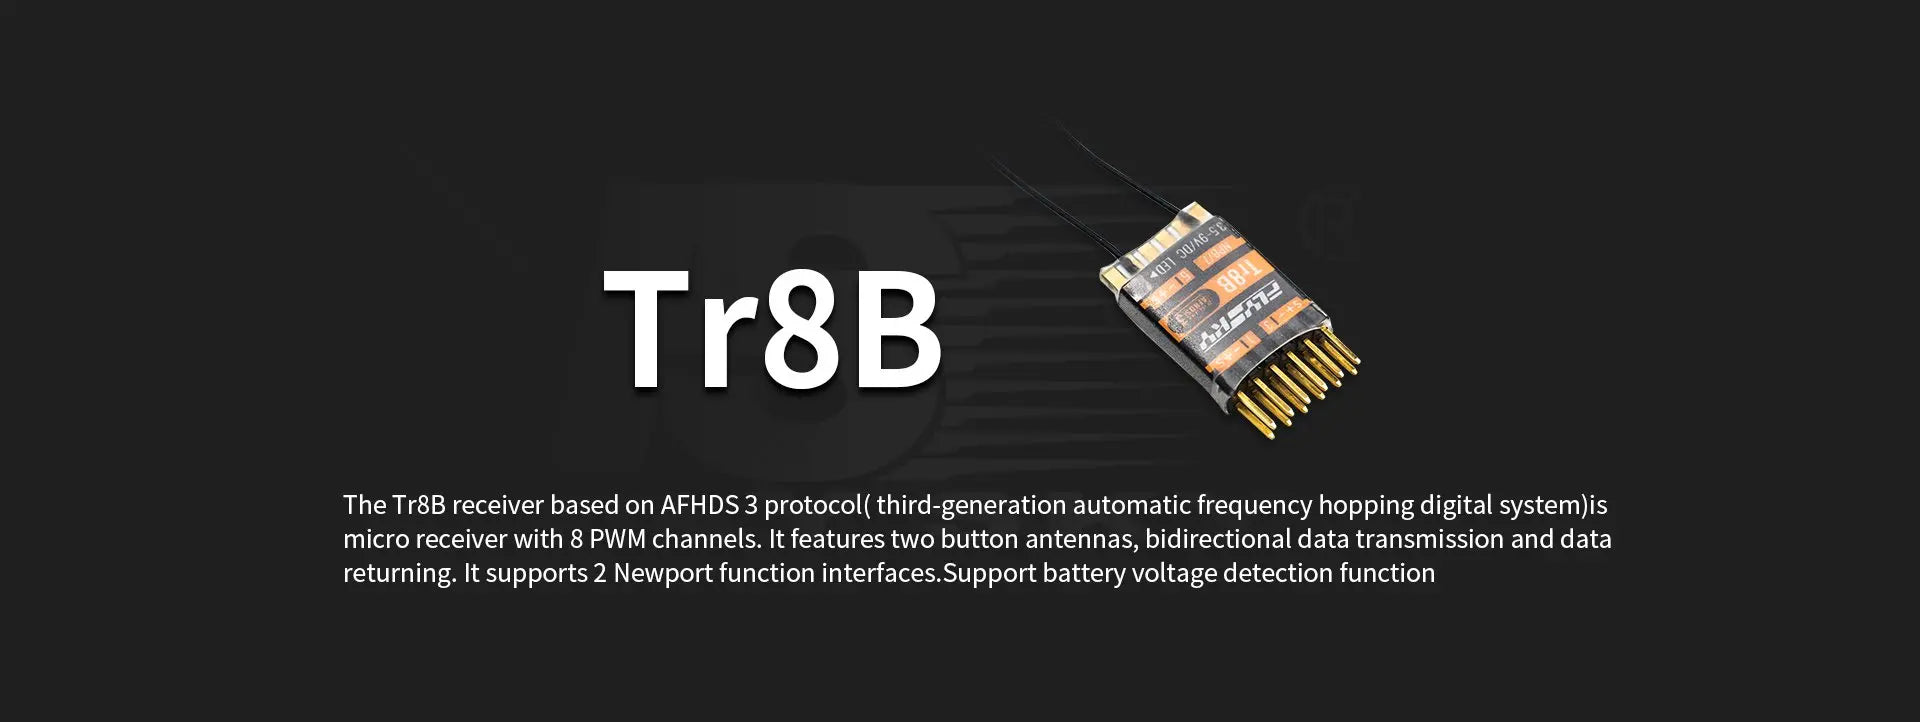 FlySky Tr8B Receiver, micro receiver with 8 PWM channels features two button antennas; bidirectional data transmission and data